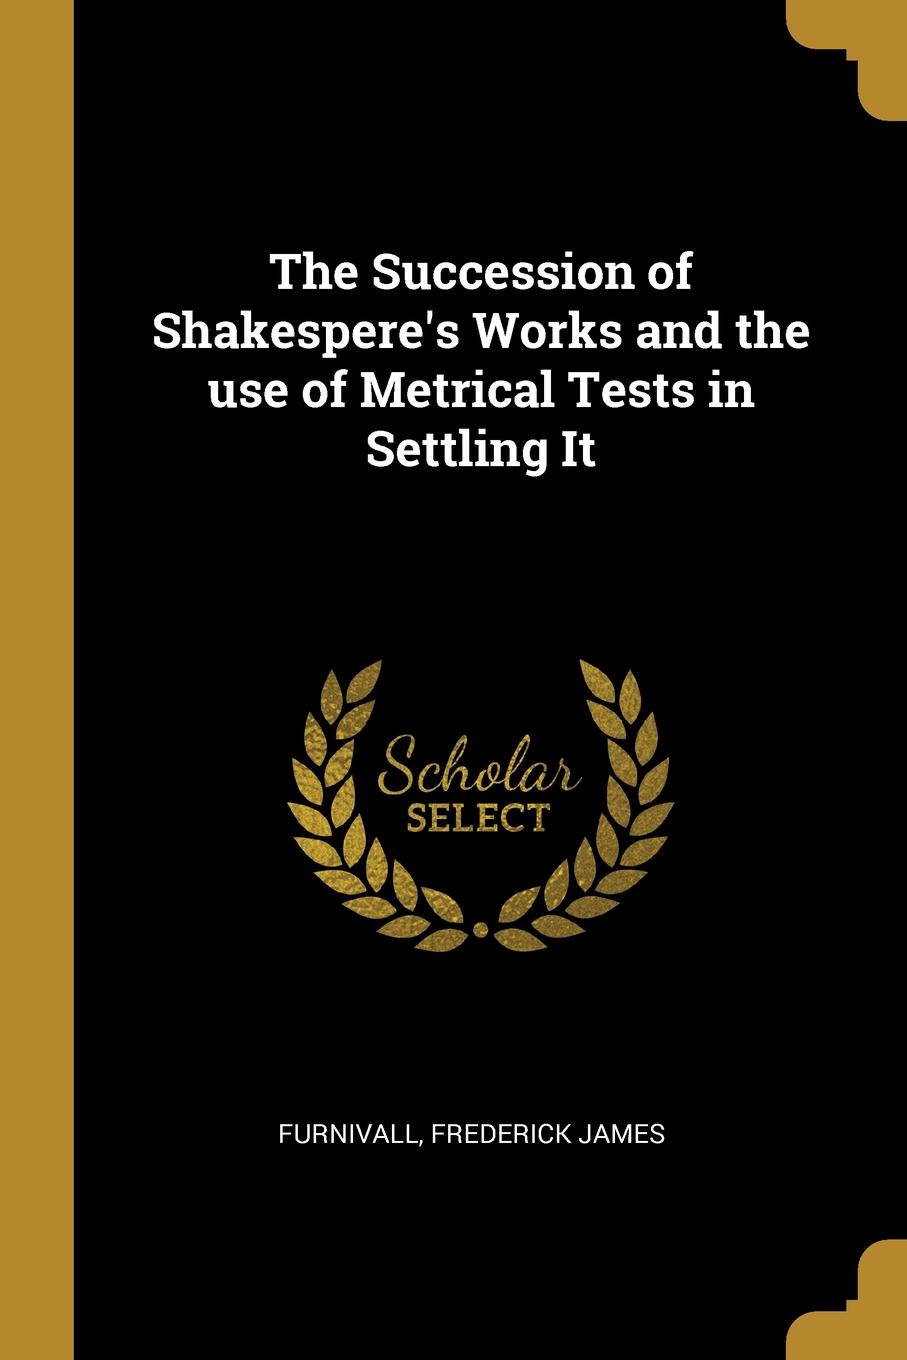 The Succession of Shakespere.s Works and the use of Metrical Tests in Settling It